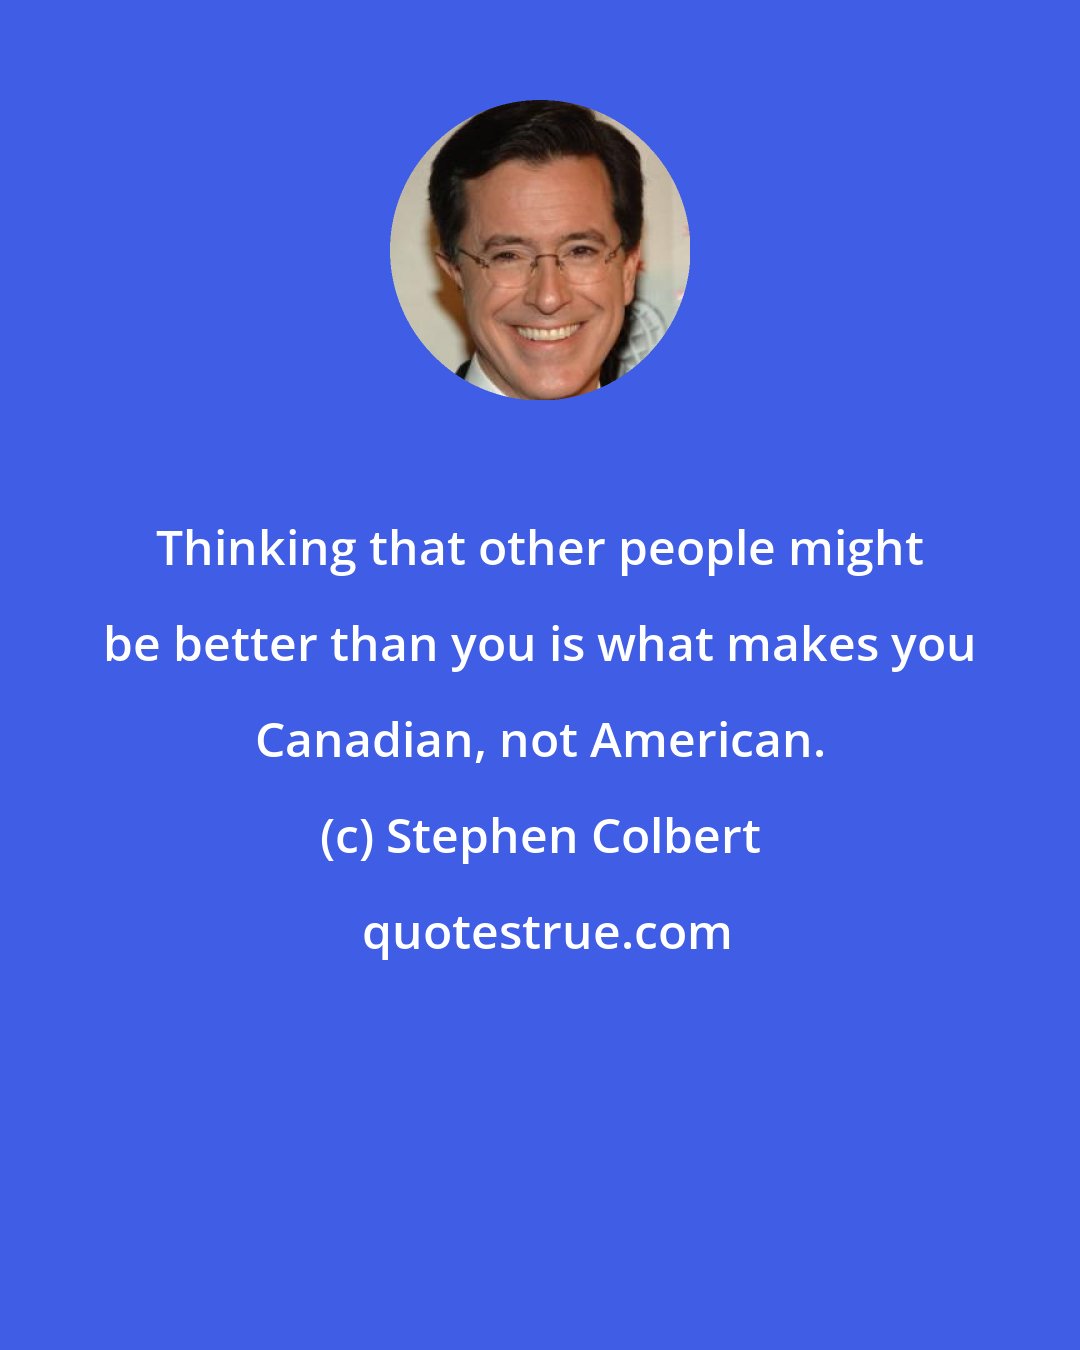 Stephen Colbert: Thinking that other people might be better than you is what makes you Canadian, not American.